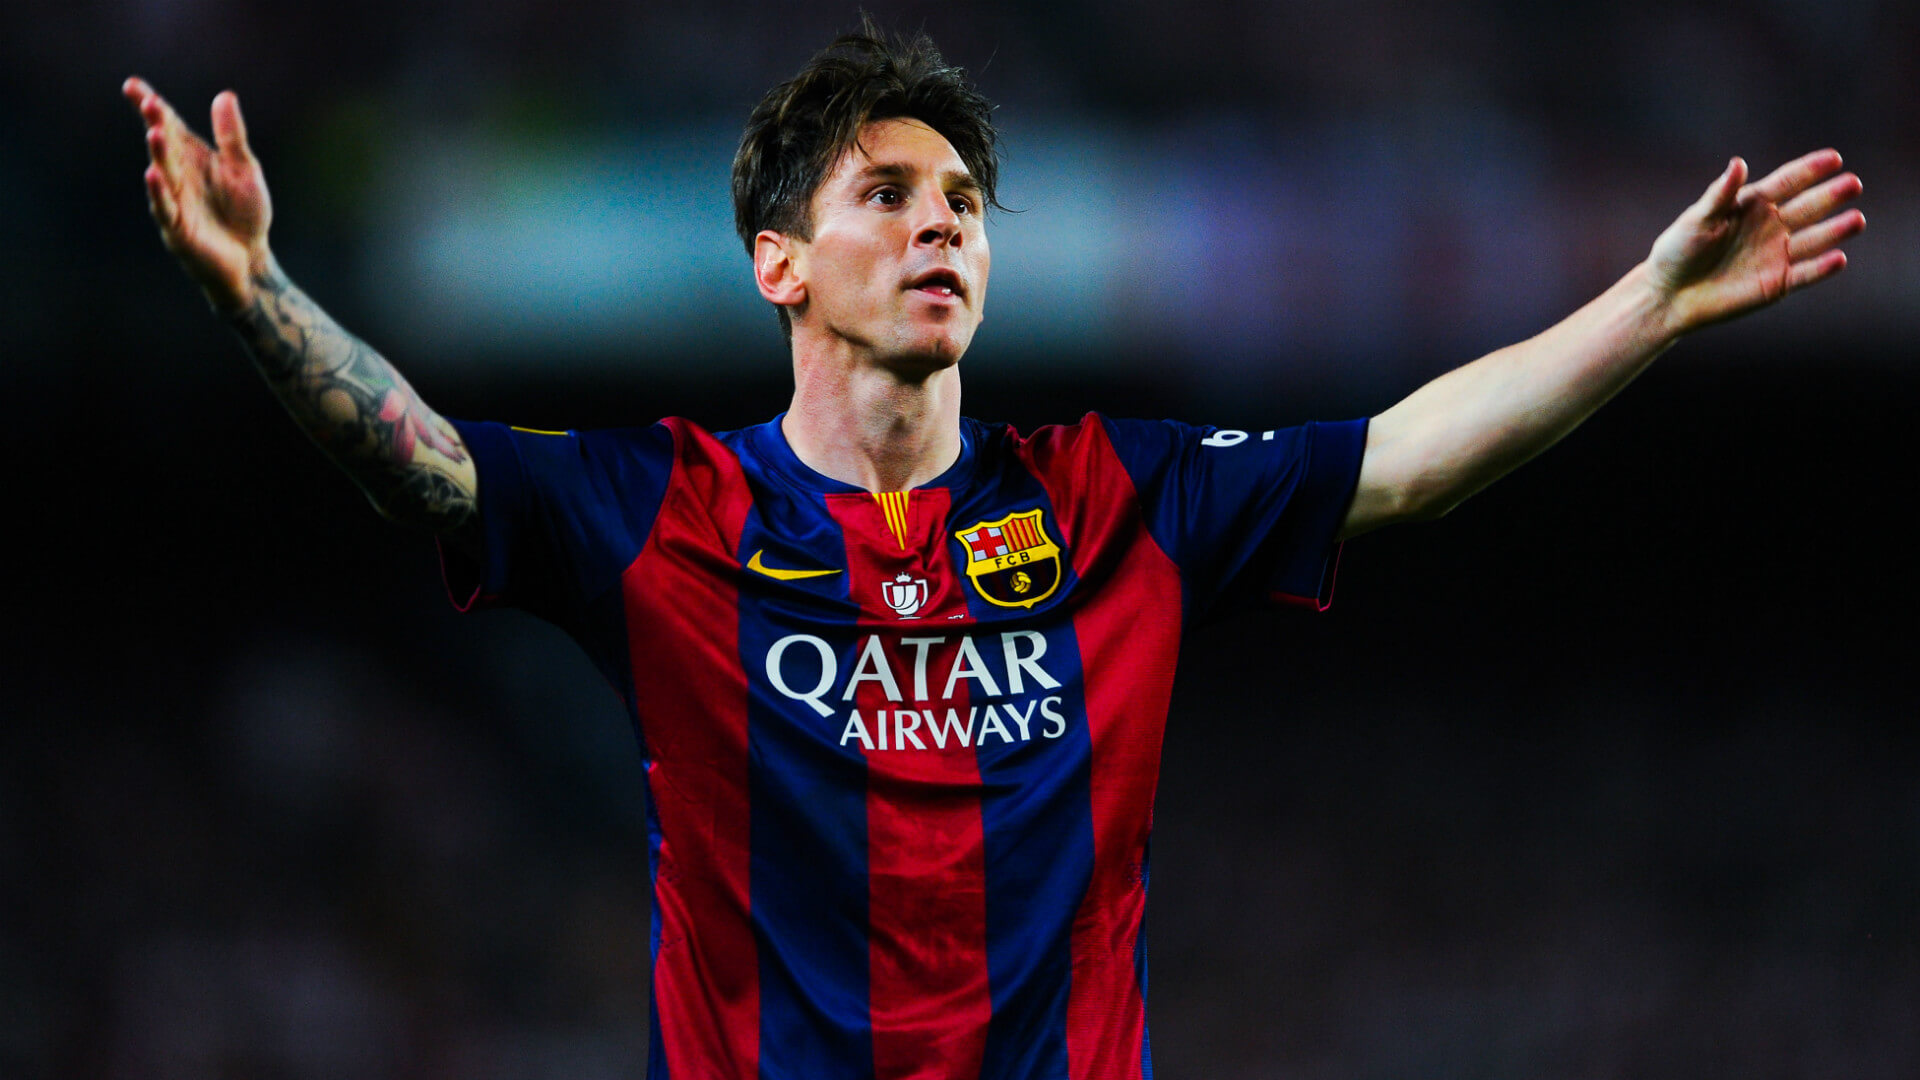 8 Interesting facts about Lionel Messi